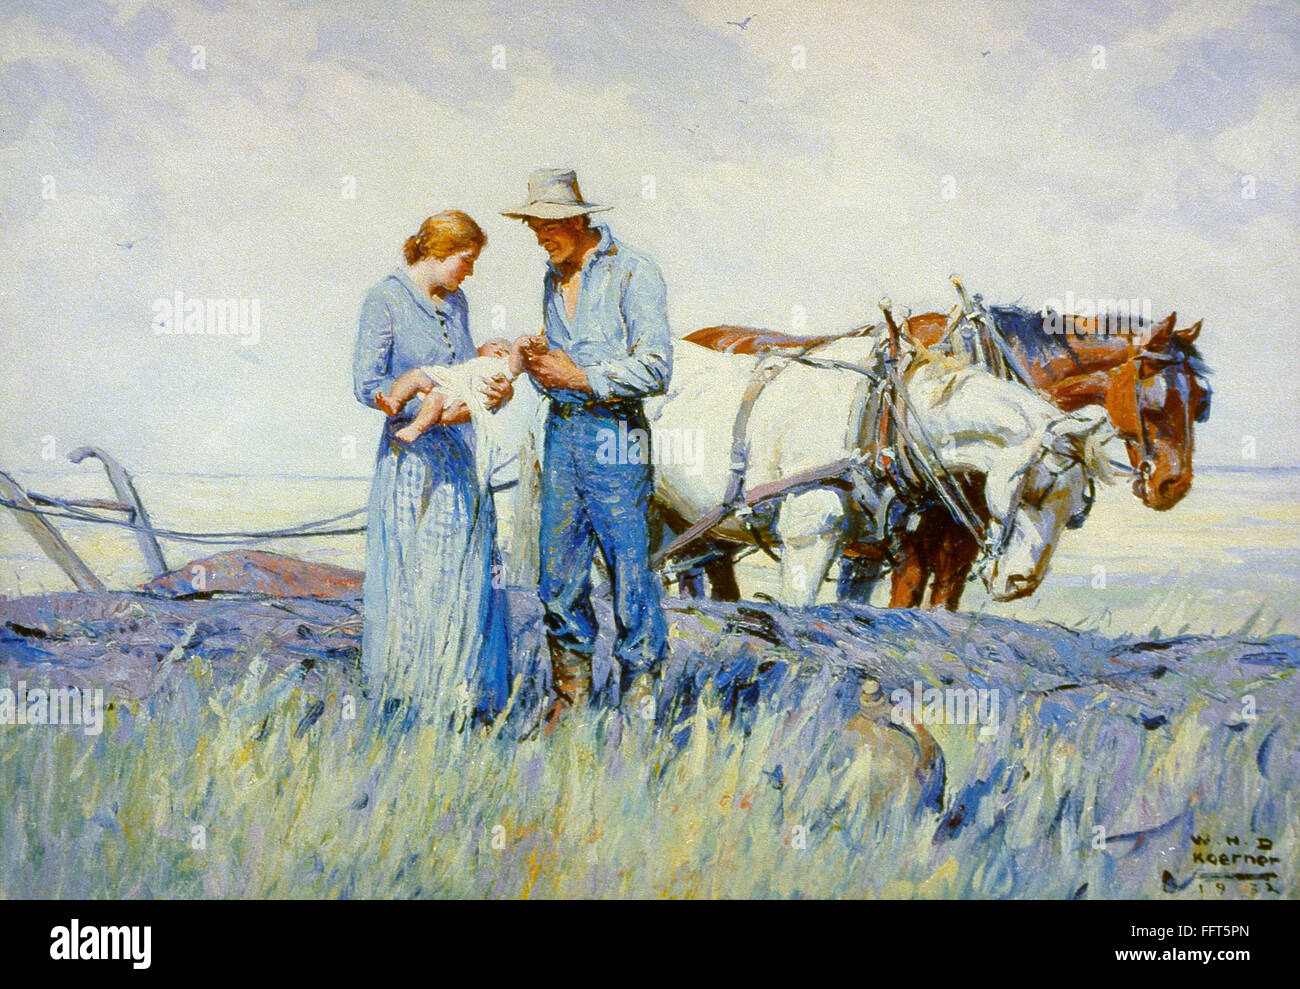 KOERNER: THE HOMESTEADERS. /nOil painting by W.H.D. Koerner, 1932. EDITORIAL USE ONLY. Stock Photo